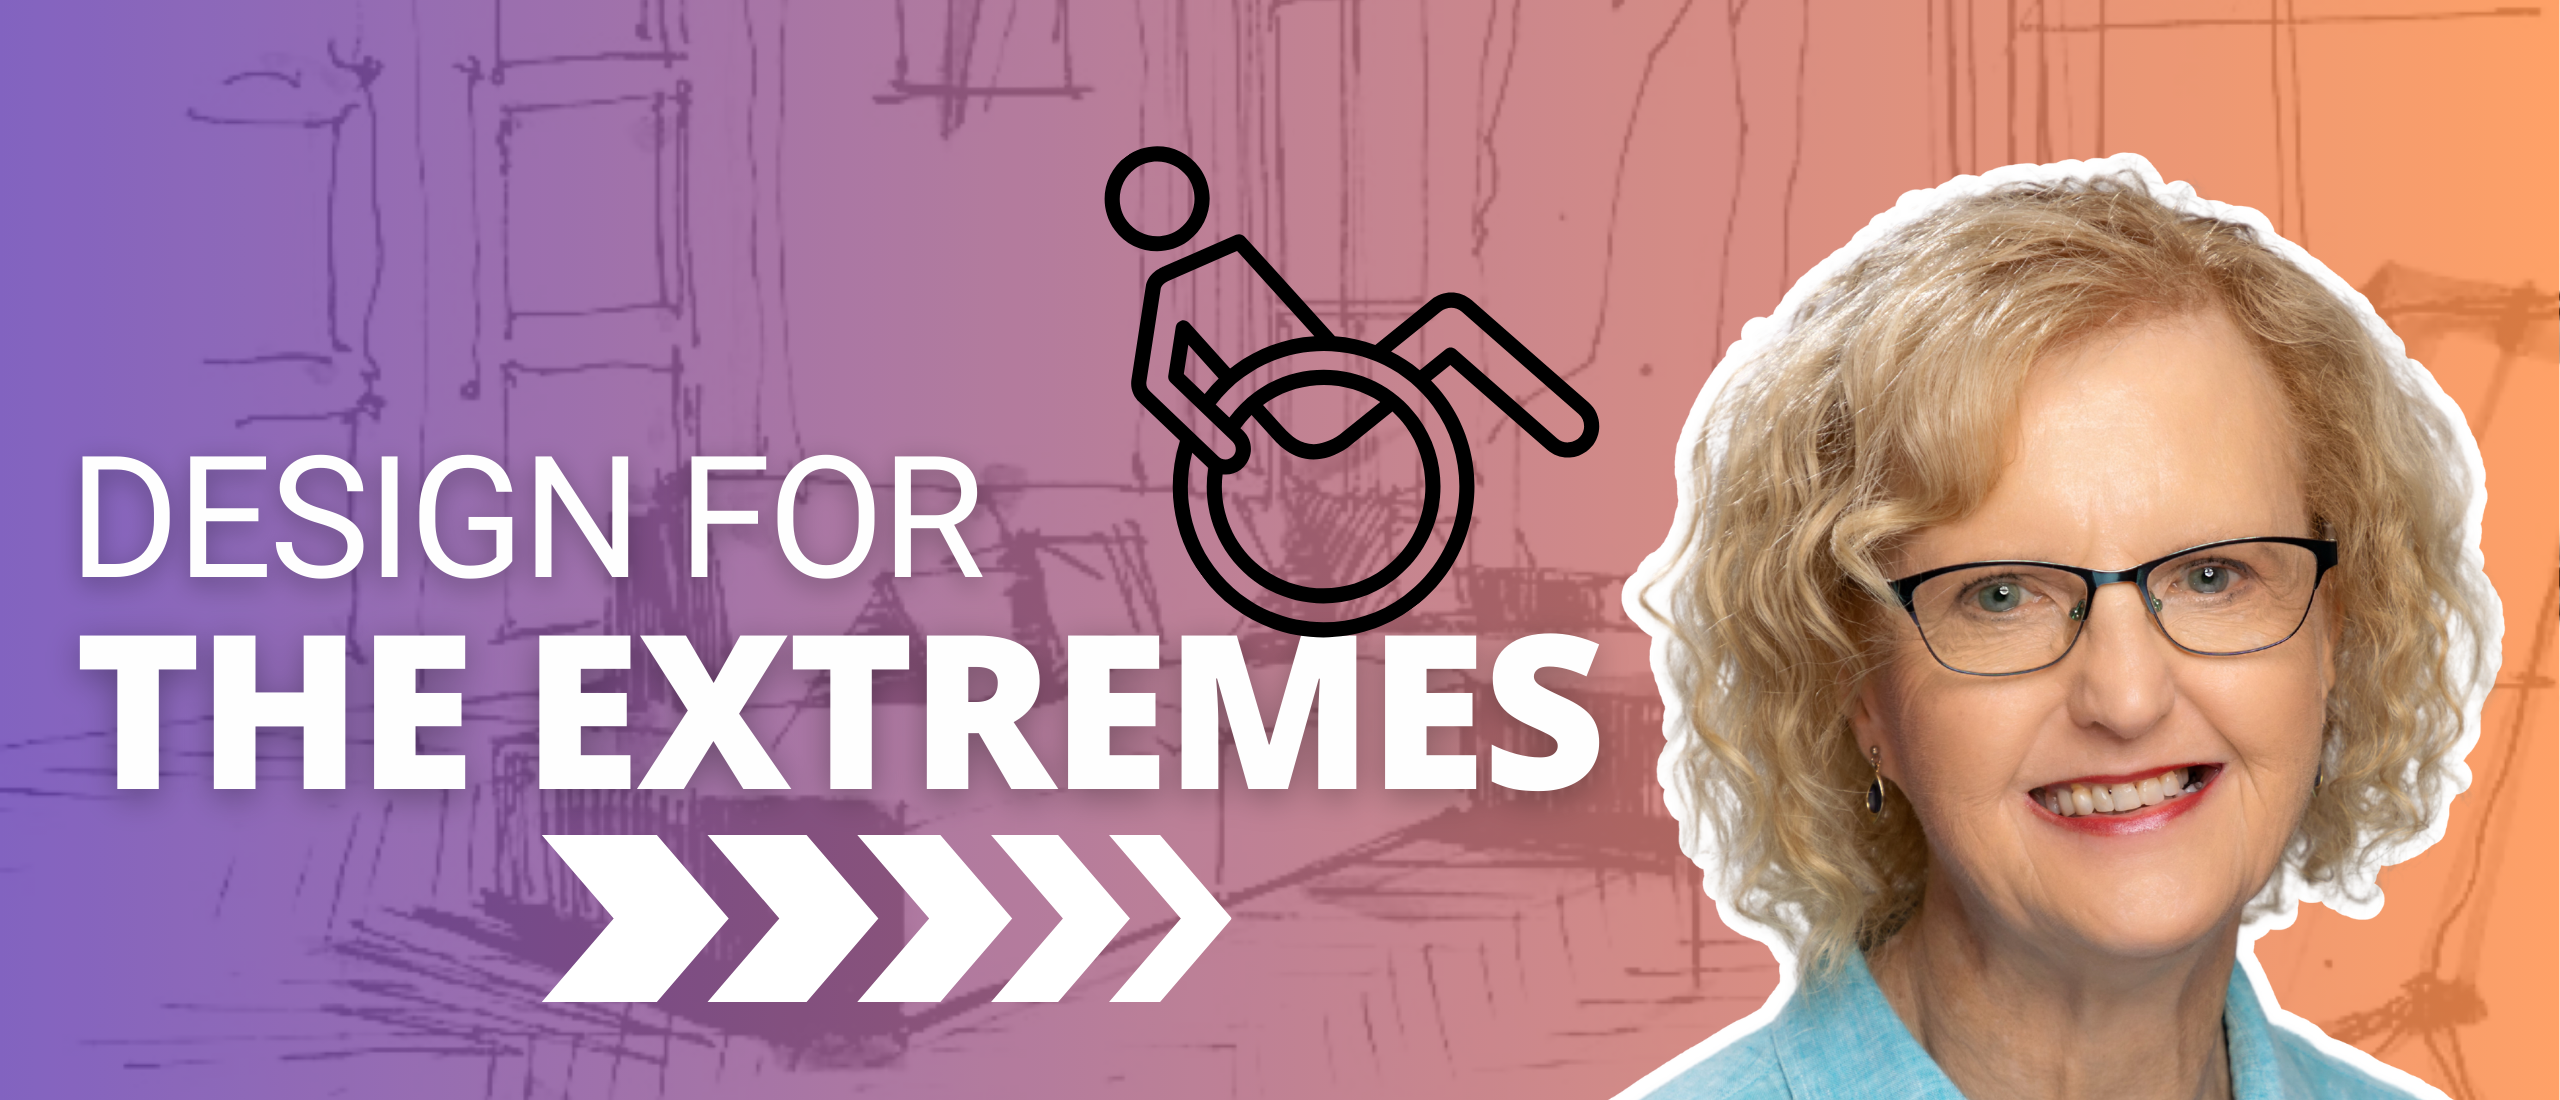 Design for the extremes, universal design - with Jane Bringolf